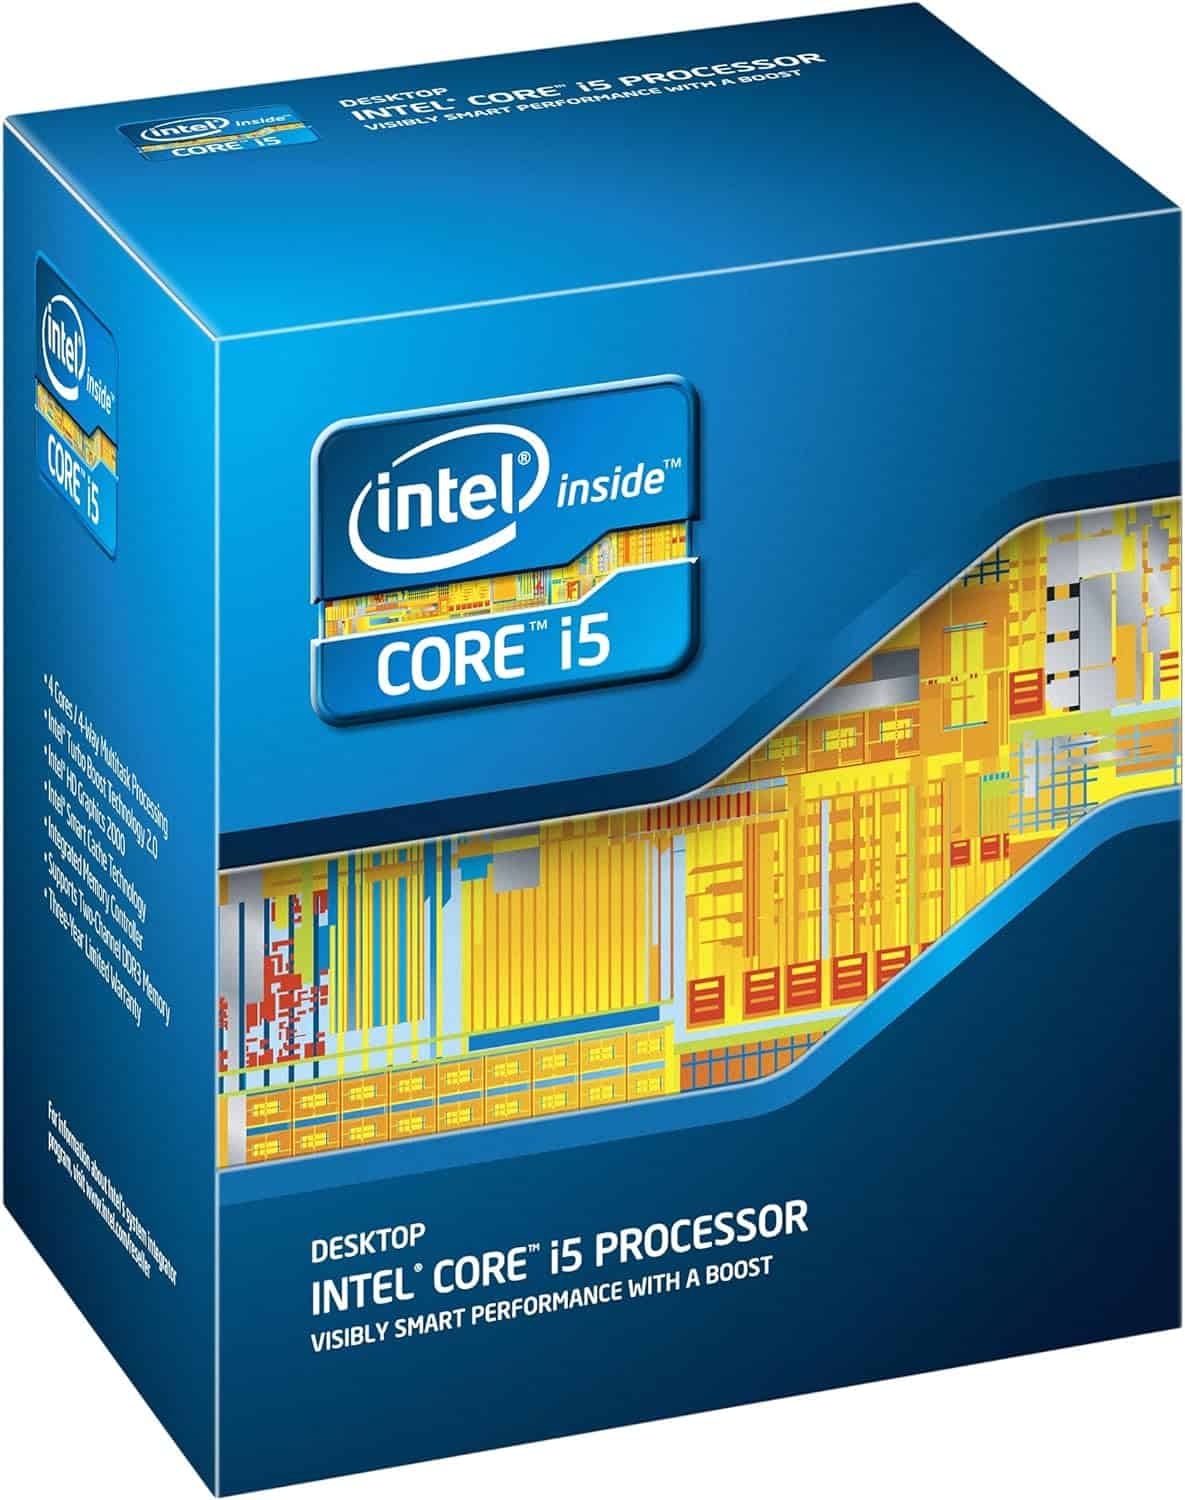 Blue packaging box of an Intel Core i5-2500 desktop processor with logos and text detailing product features.